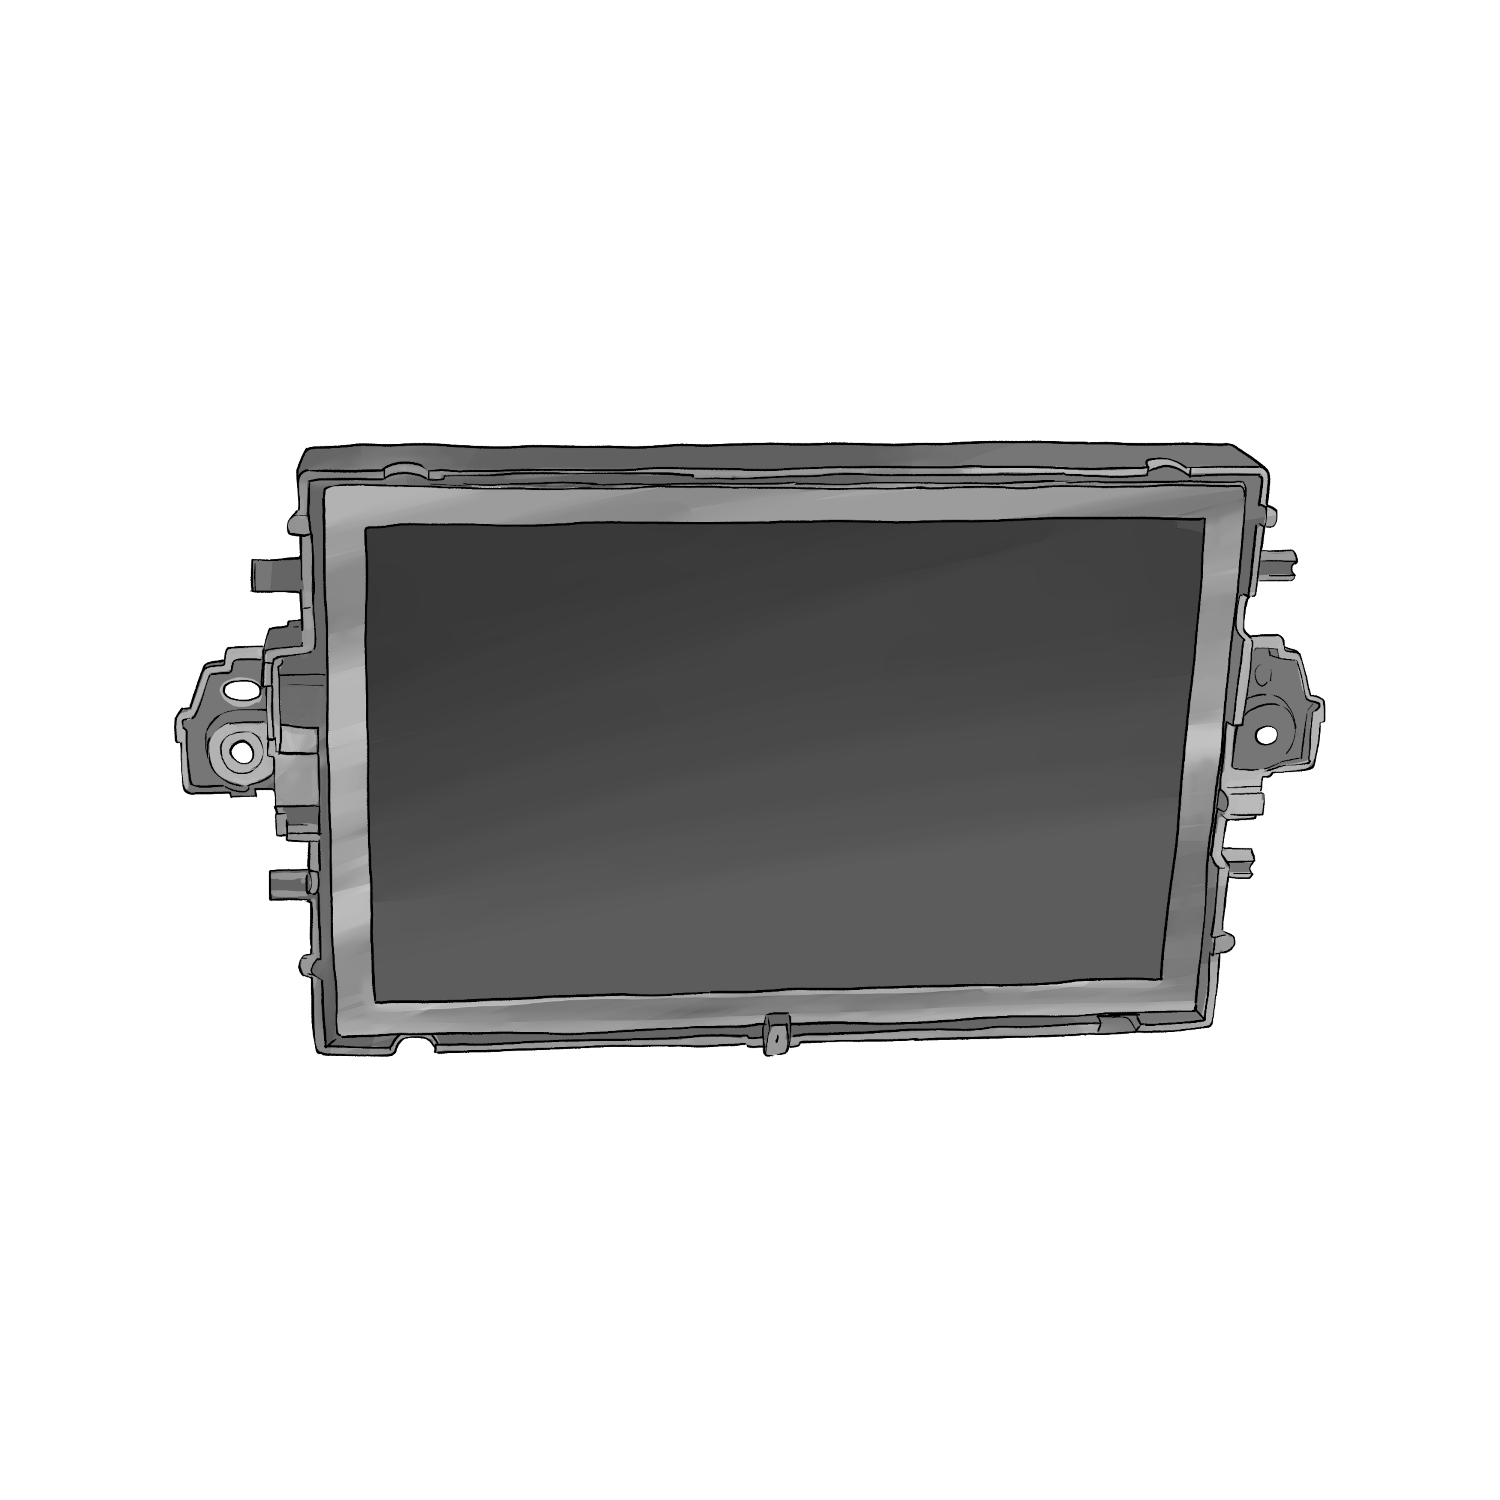  Product image 1 of the product “VisControl LCD ”